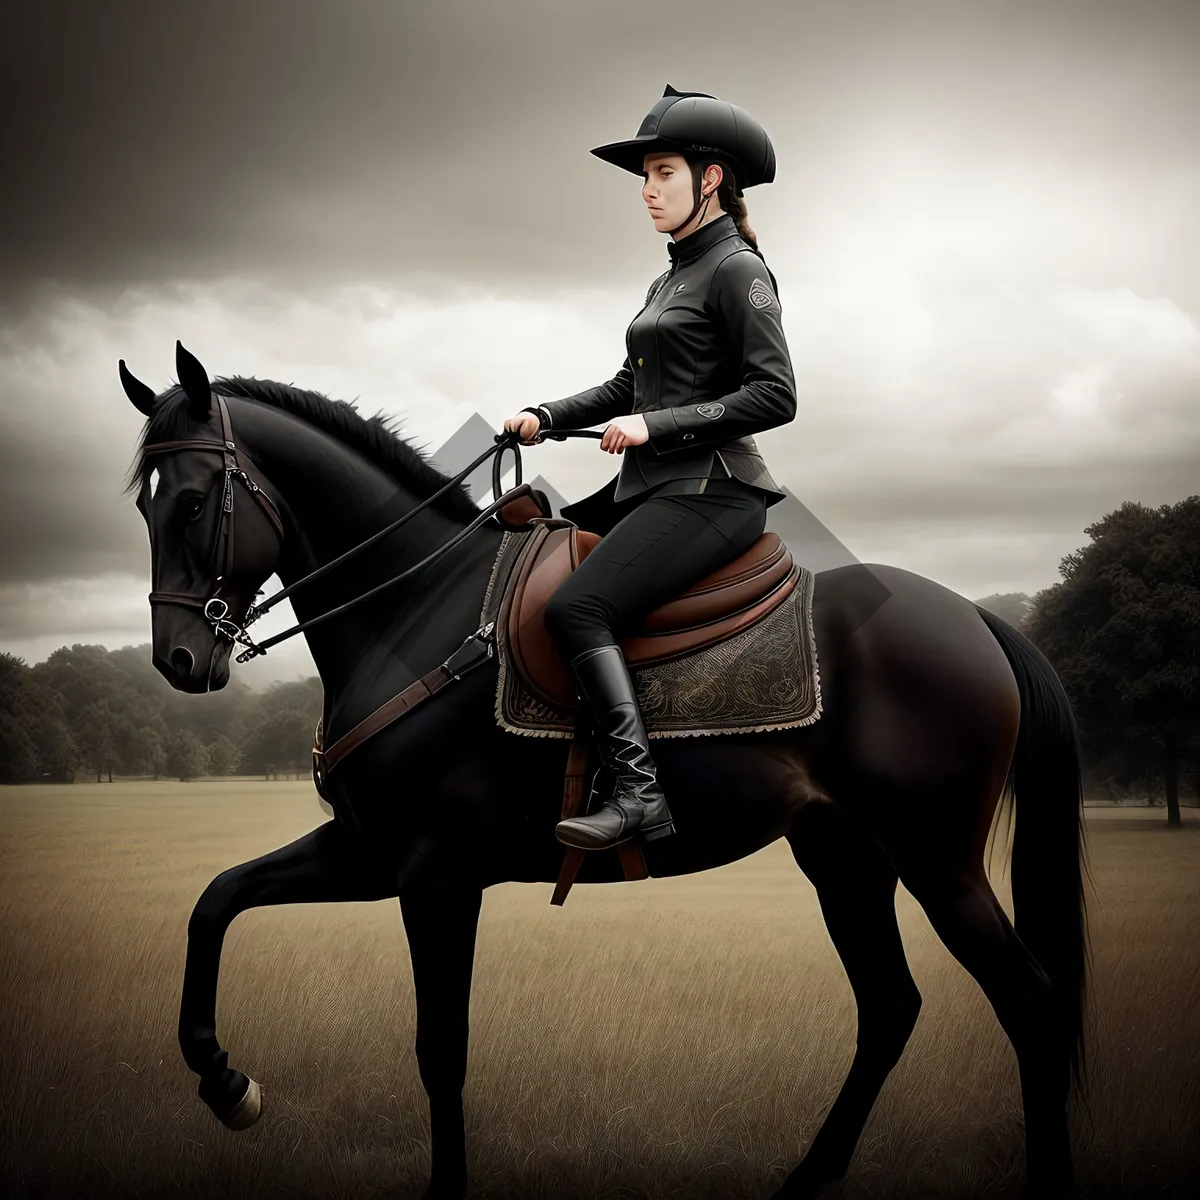 Picture of Sidesaddle Rider on Majestic Stallion - Equestrian Sport